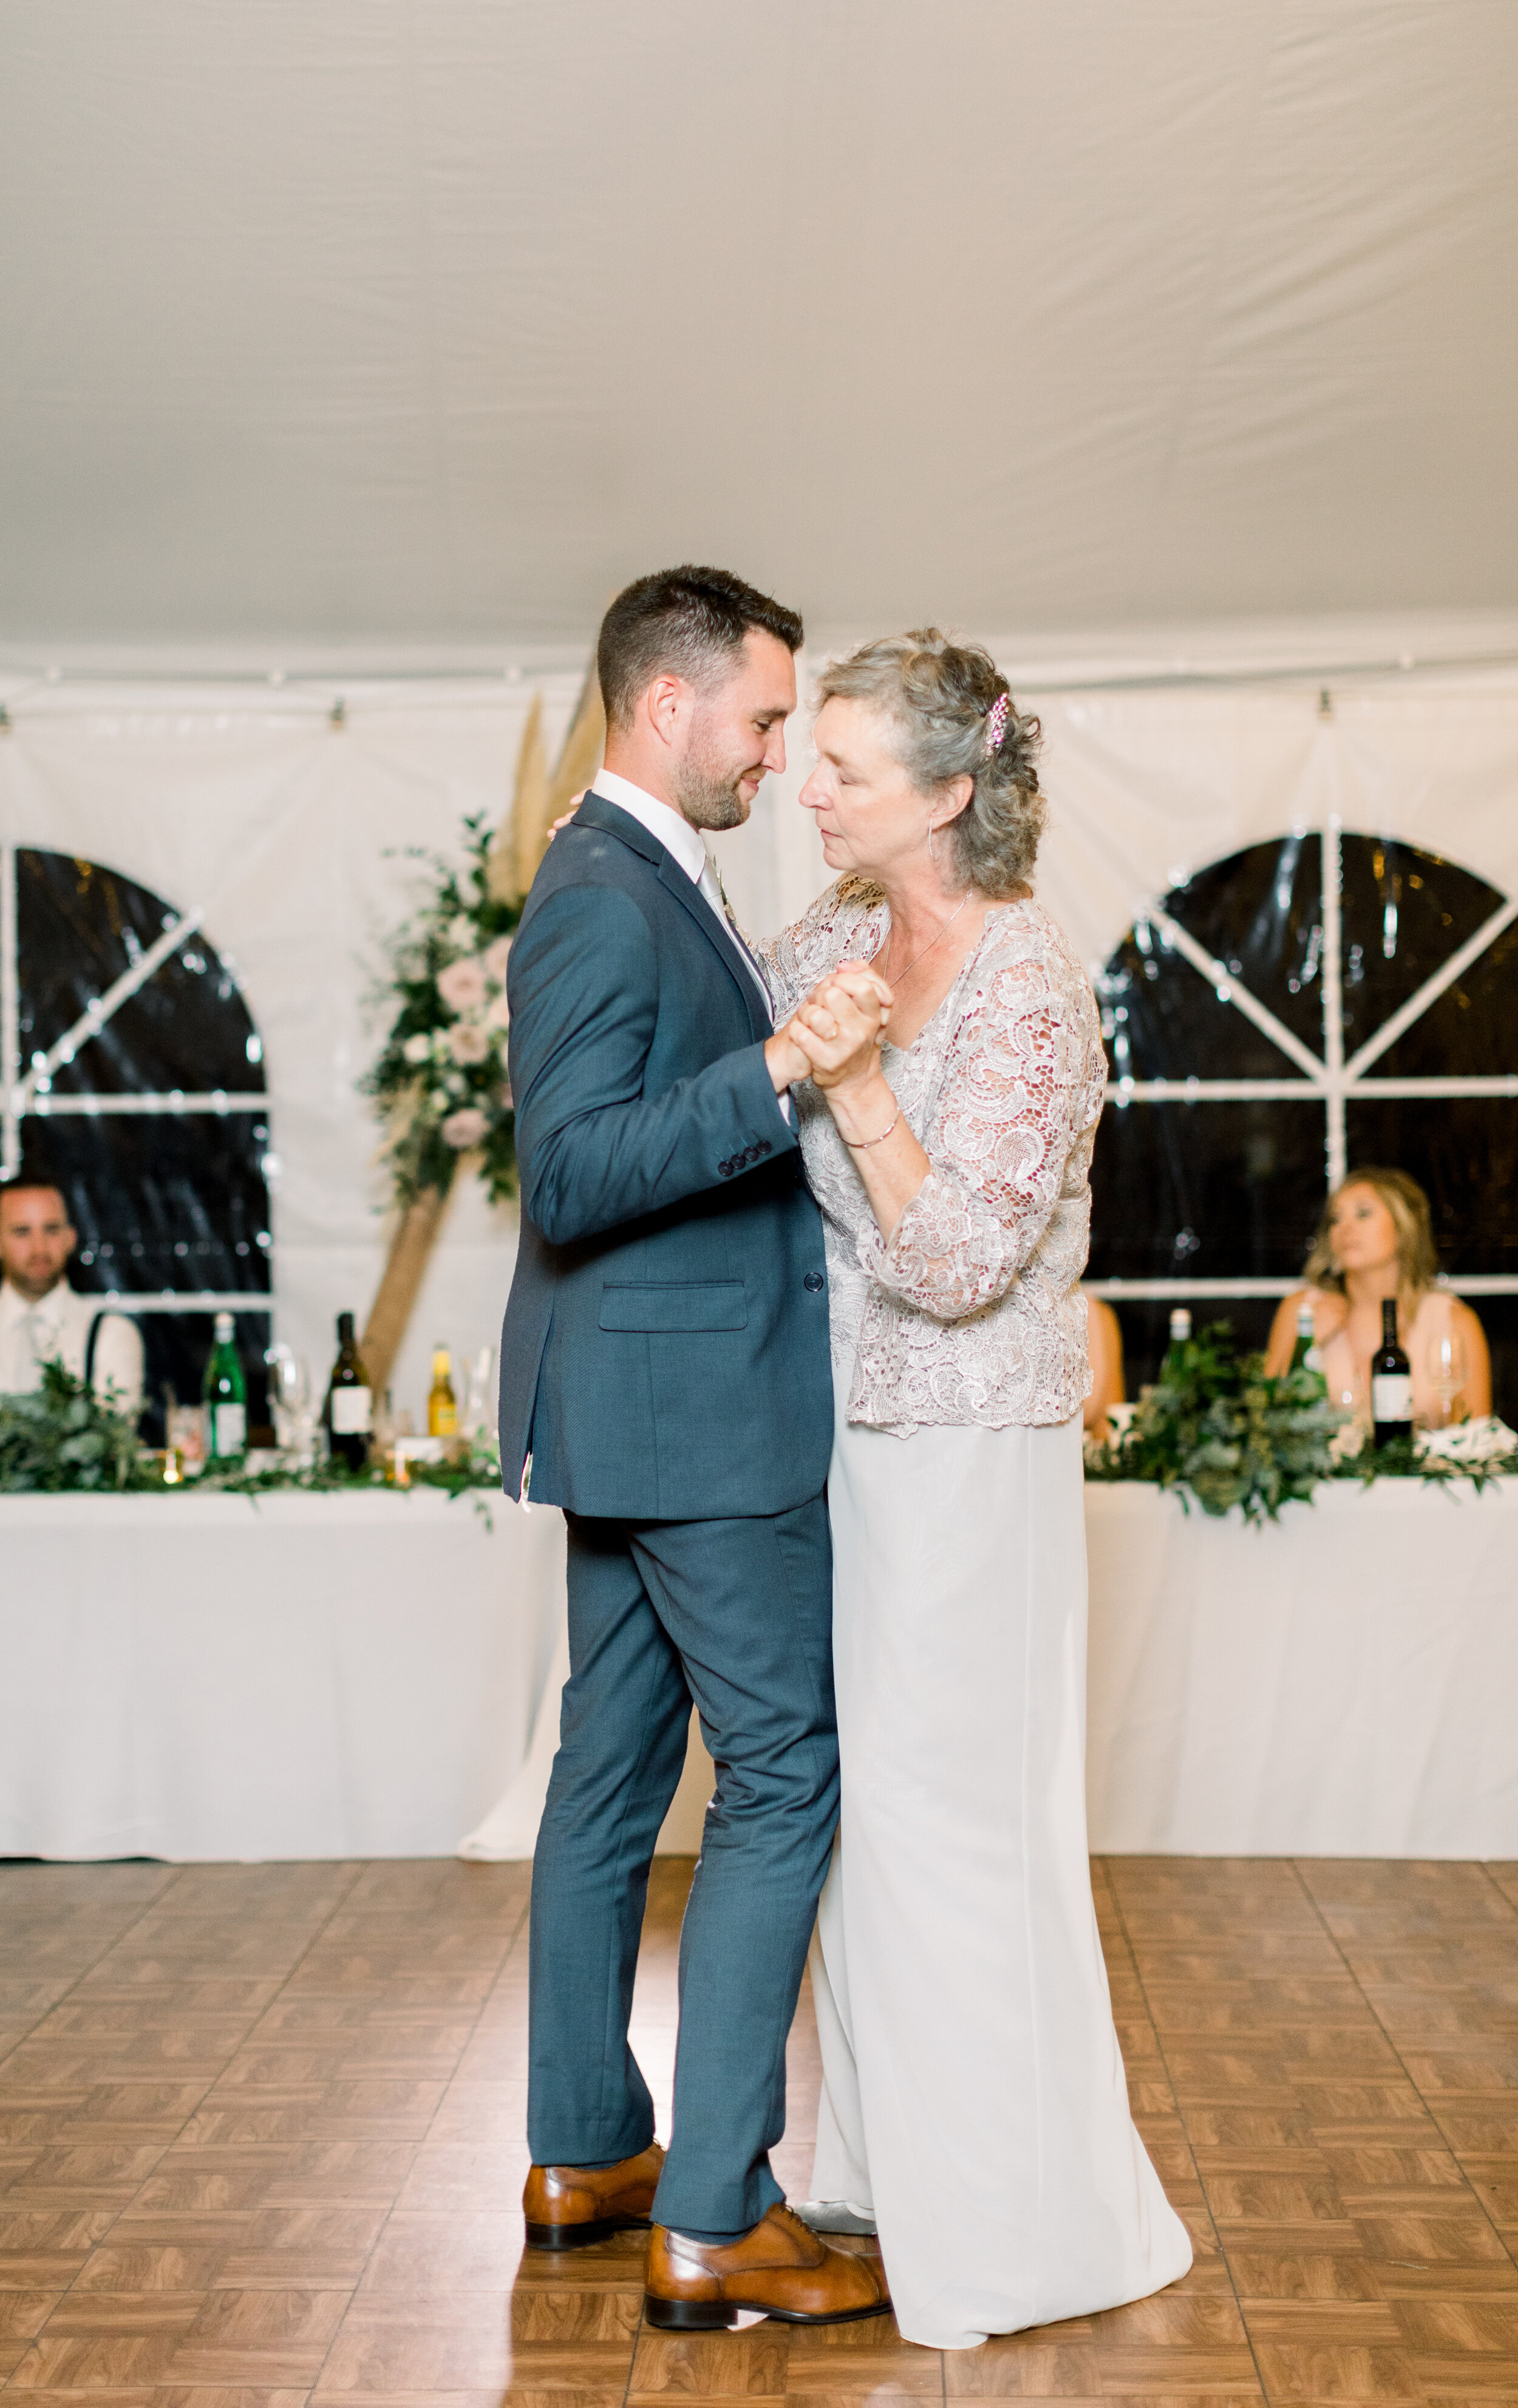  A beautiful moment between the groom and mother of the groom as they dance captured by Chelsea Mason Photography in Kinmount, Ontario. Mother of the groom dance night away dance floor blue navy wedding attire gray dress inspo backyard wedding outdoo